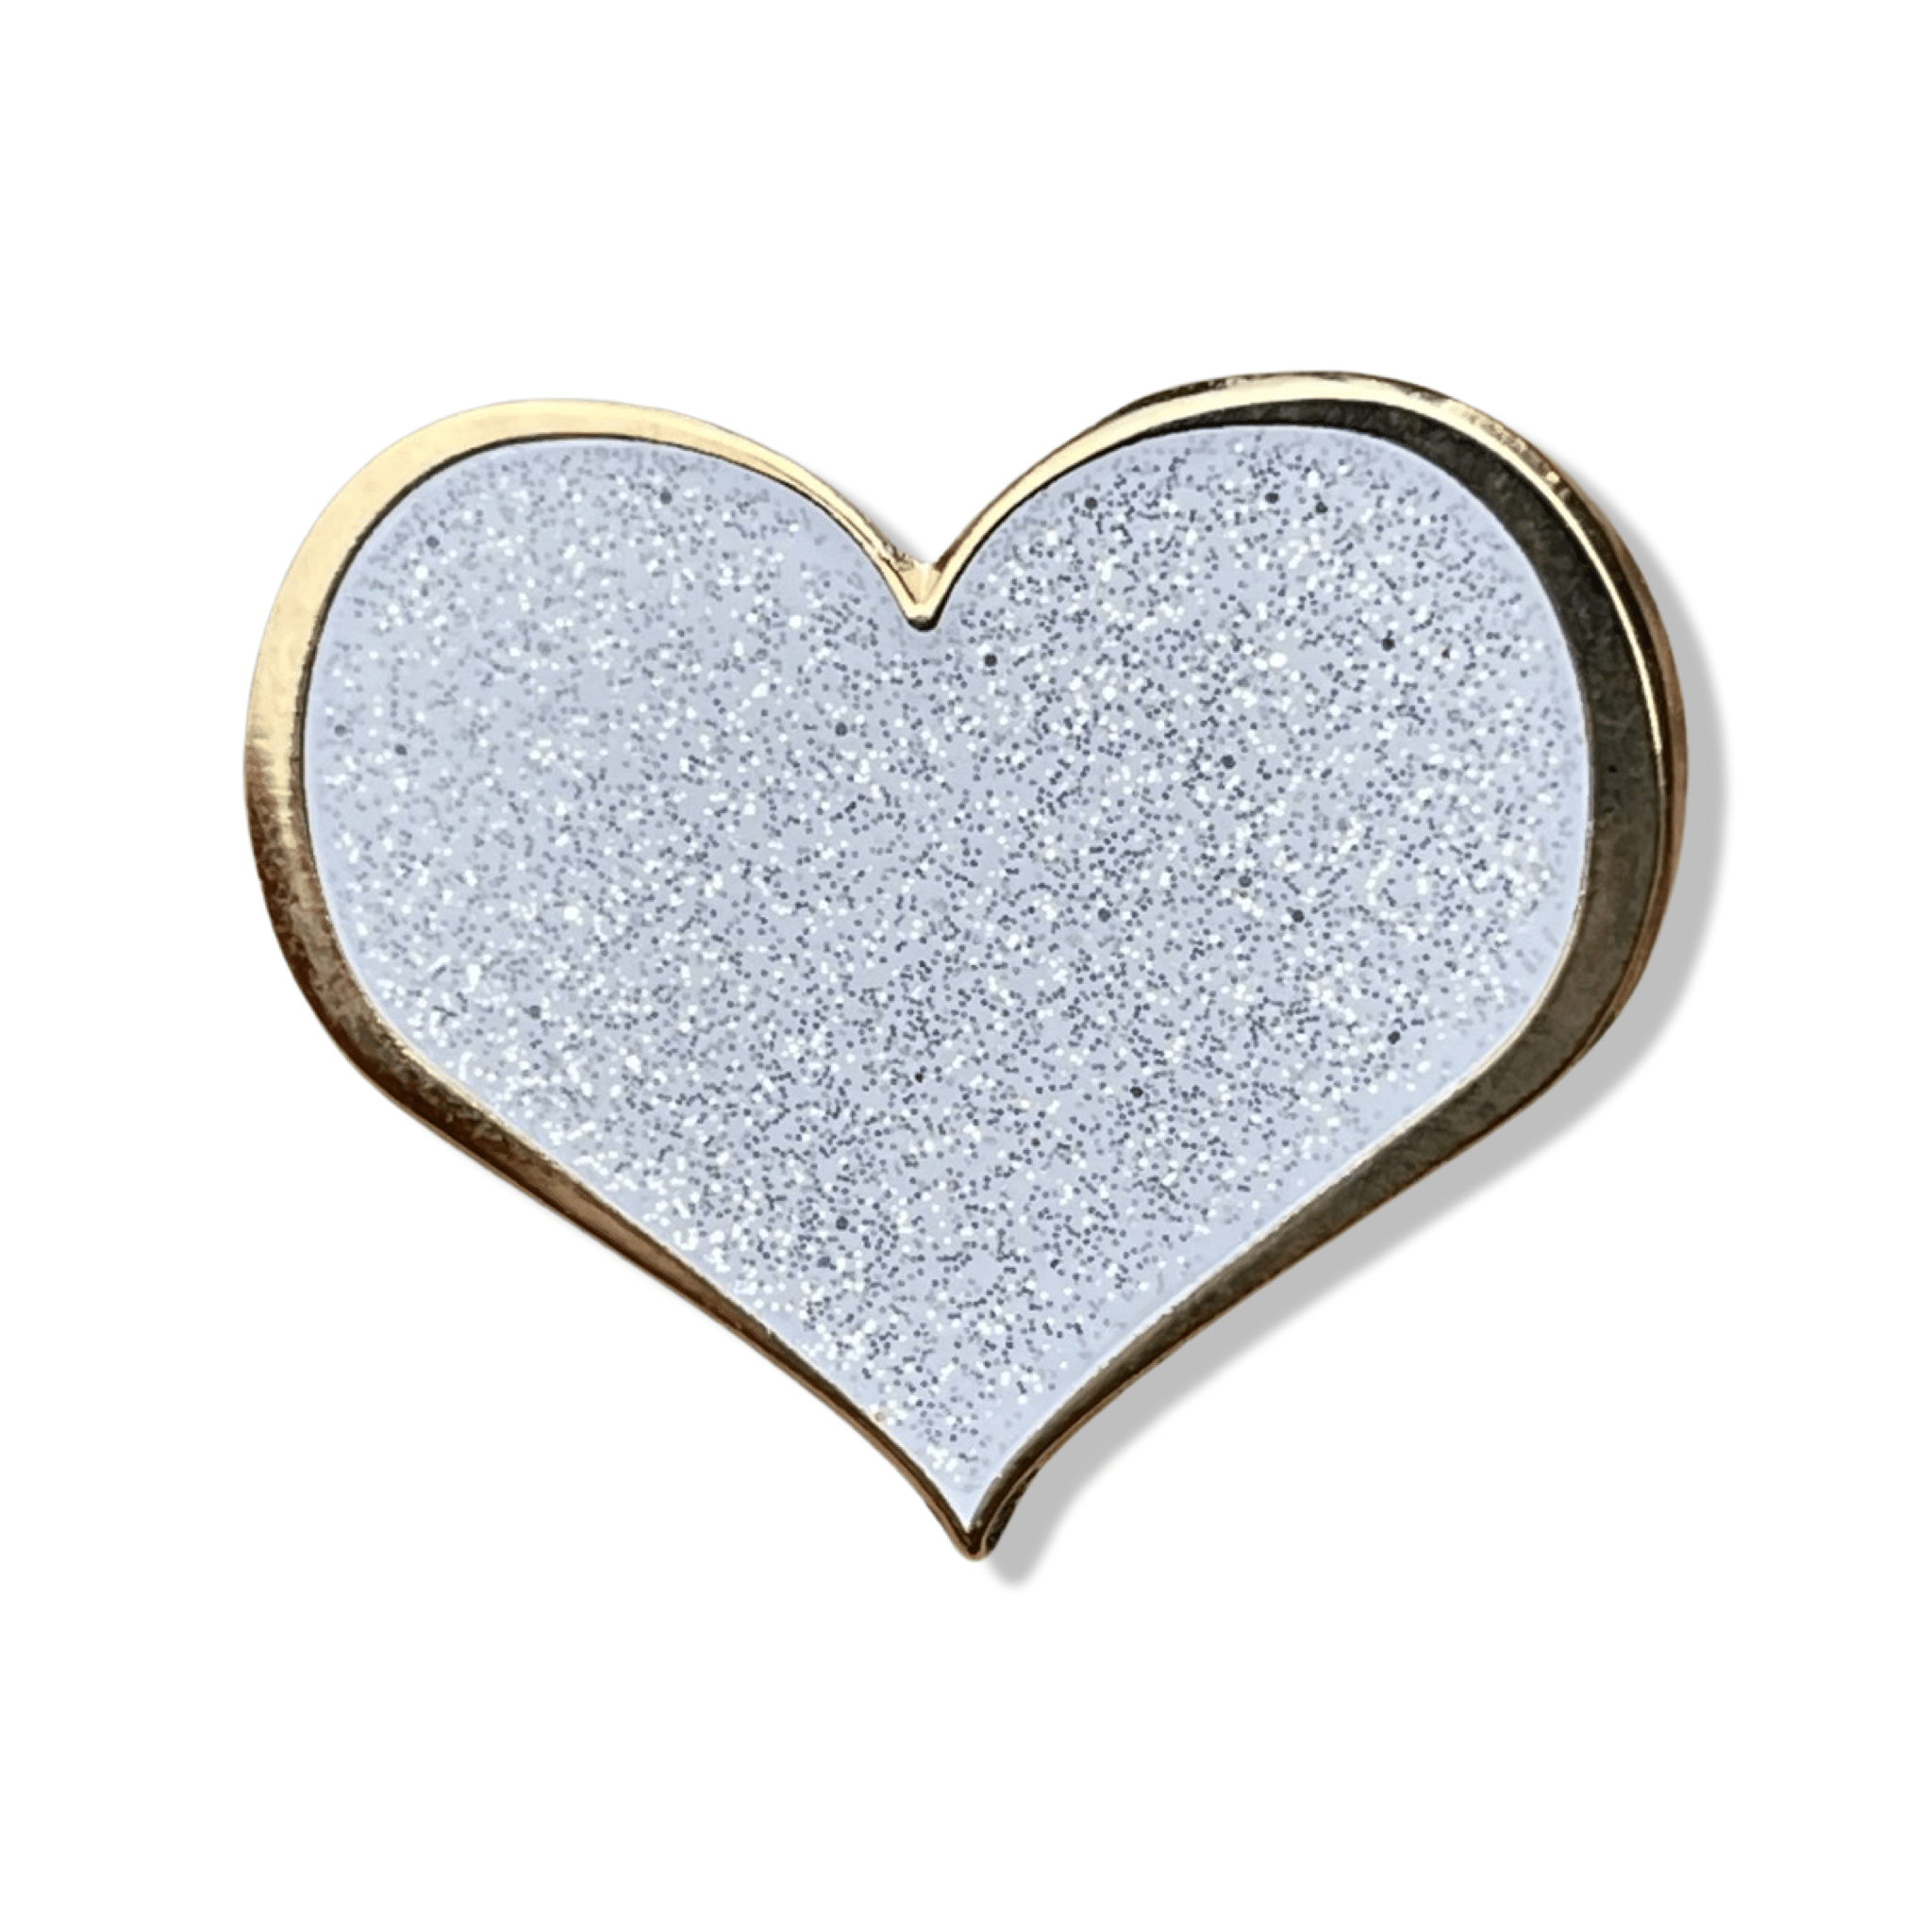 Diamond Enamel Pin - Glitter Diamond in Modern Colors. Stylish Fashion Pin with bling. A Sparkly Gift! Buy One (or A few!) for Yourself.